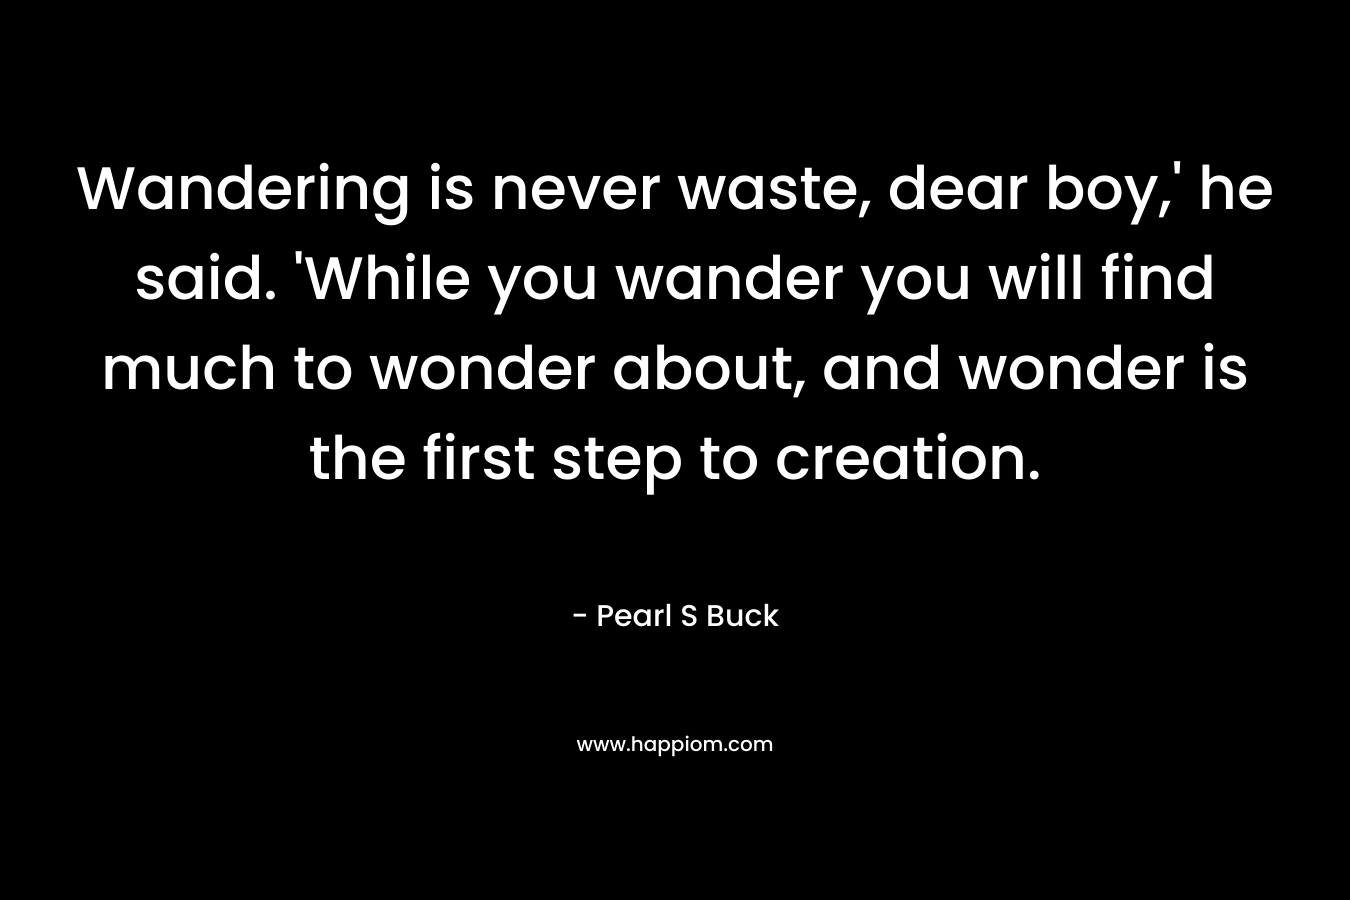 Wandering is never waste, dear boy,’ he said. ‘While you wander you will find much to wonder about, and wonder is the first step to creation. – Pearl S Buck